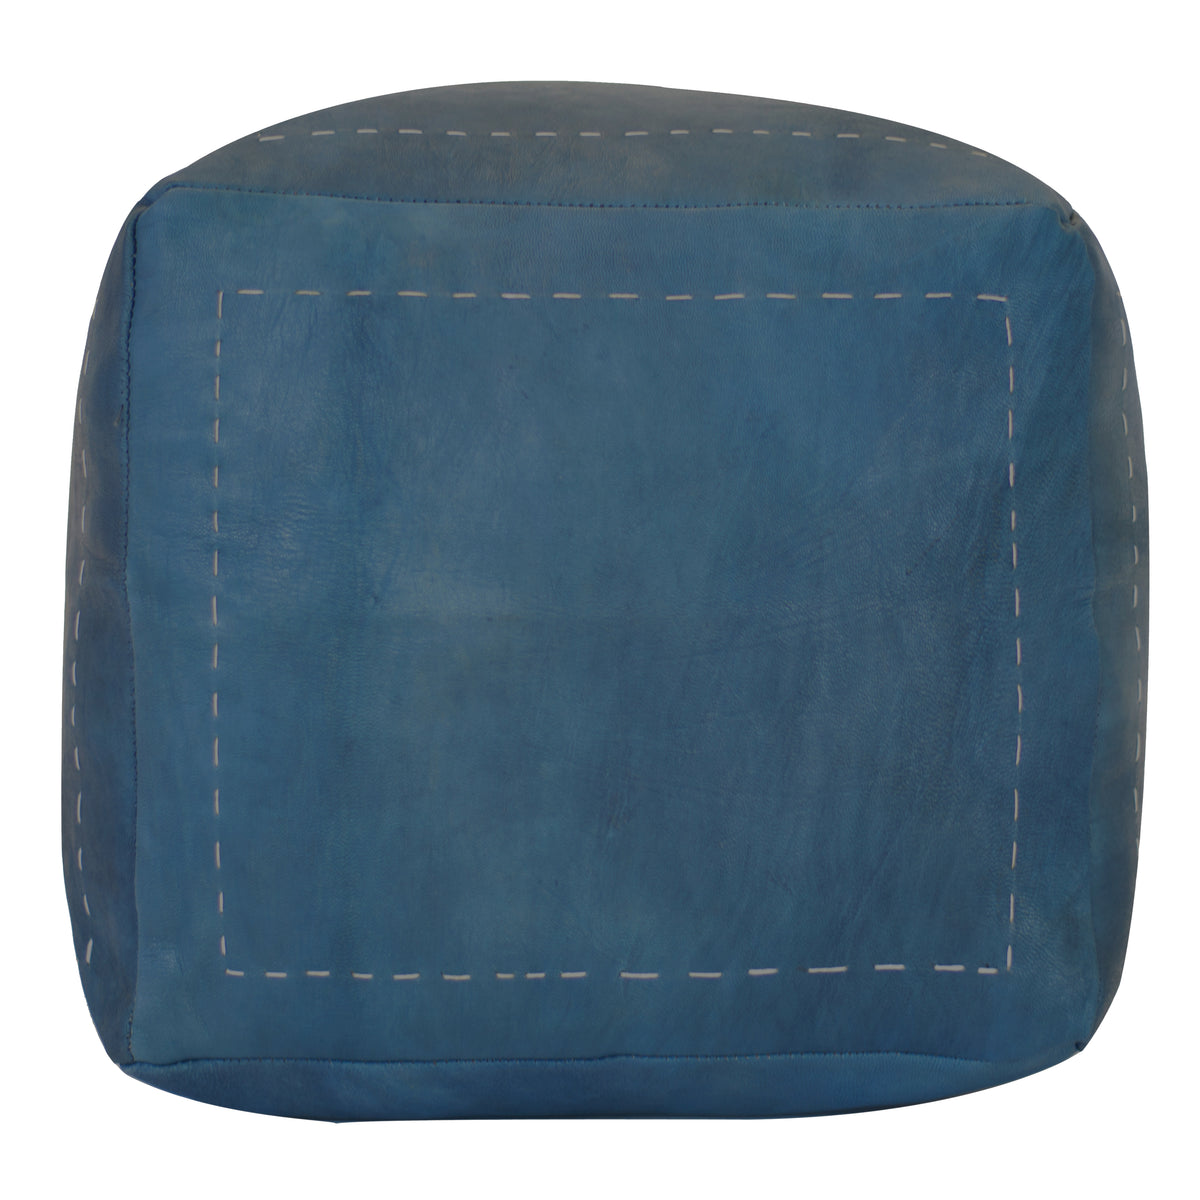 Moroccan Contemporary Leather Pouf, Slate Blue